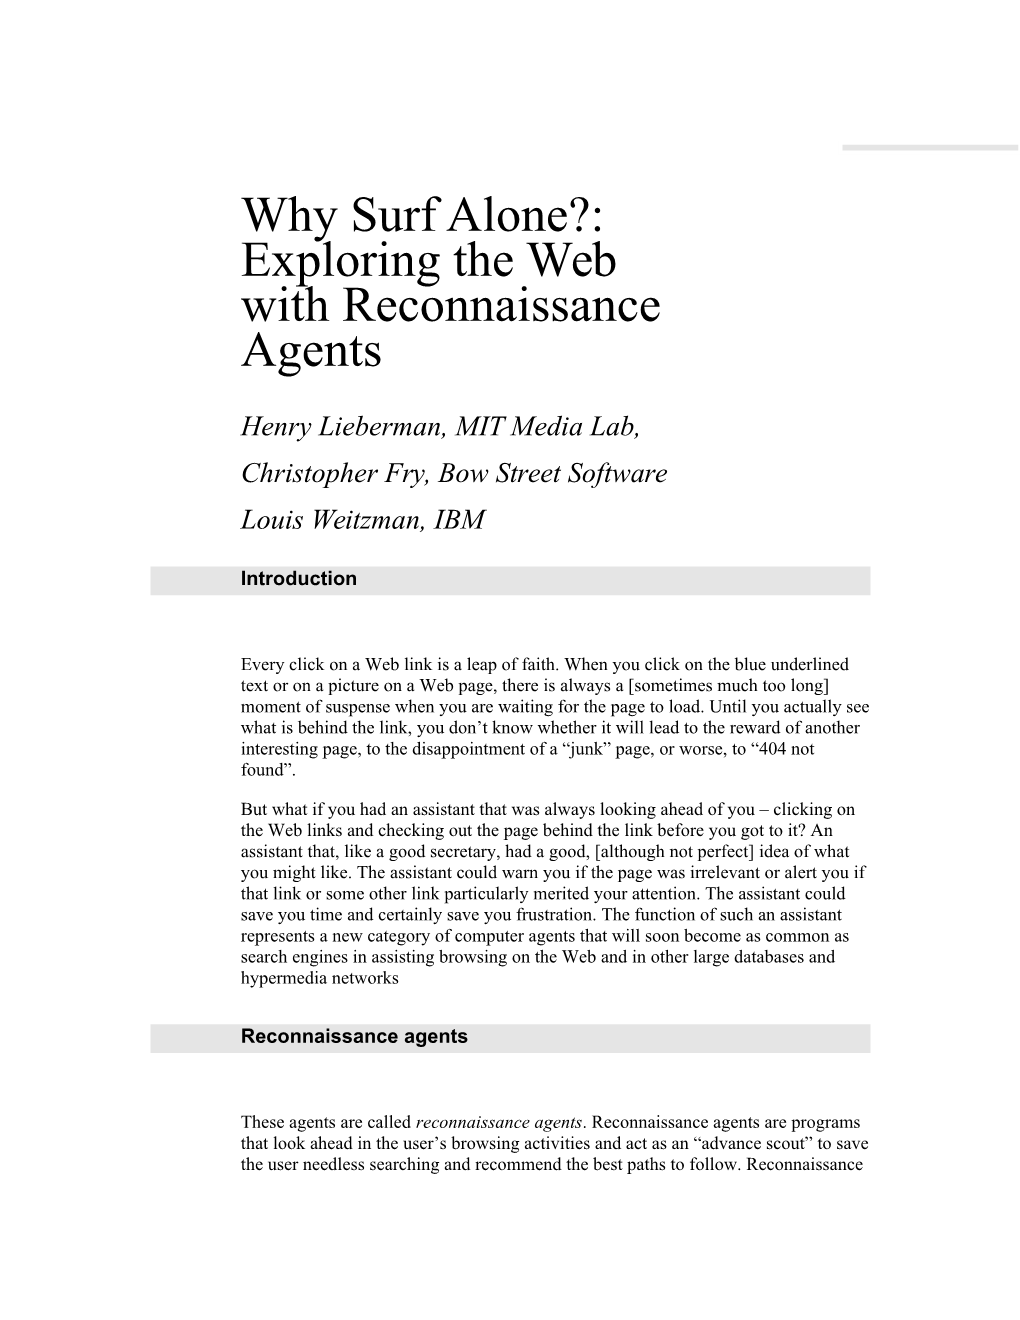 Why Surf Alone?: Exploring the Web with Reconnaissance Agents